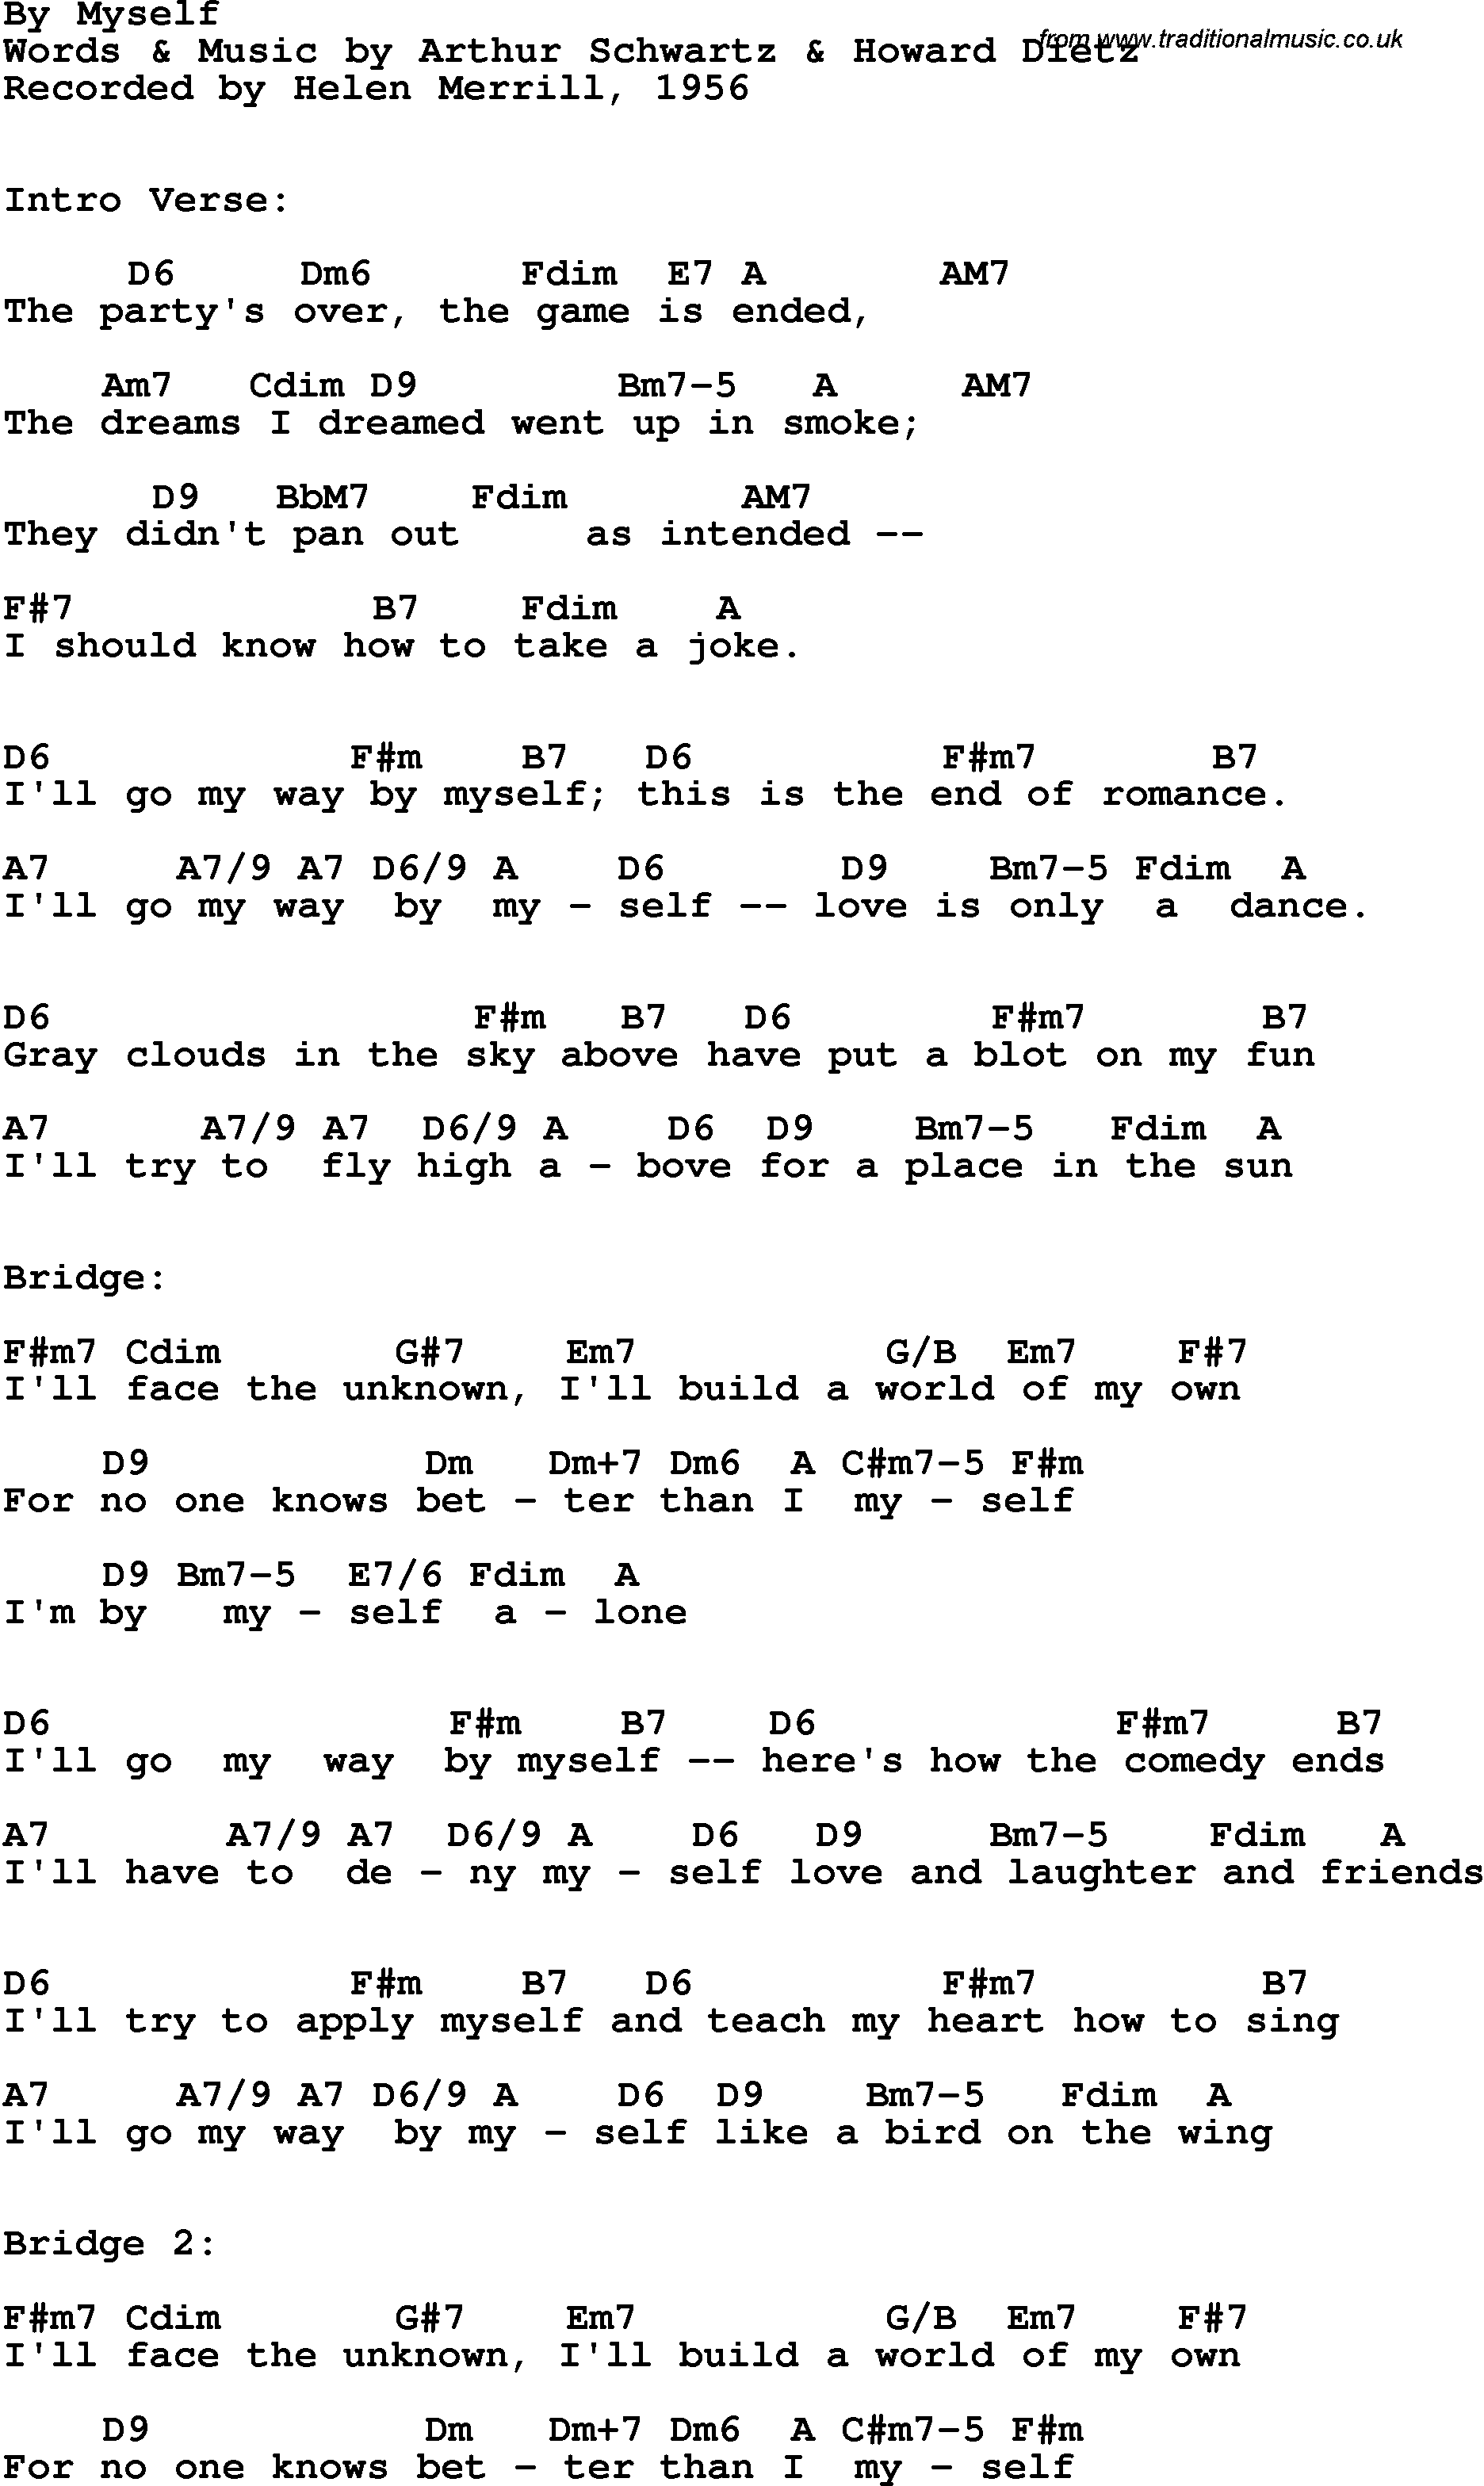 Song Lyrics with guitar chords for By Myself - Helen Merrill, 1956